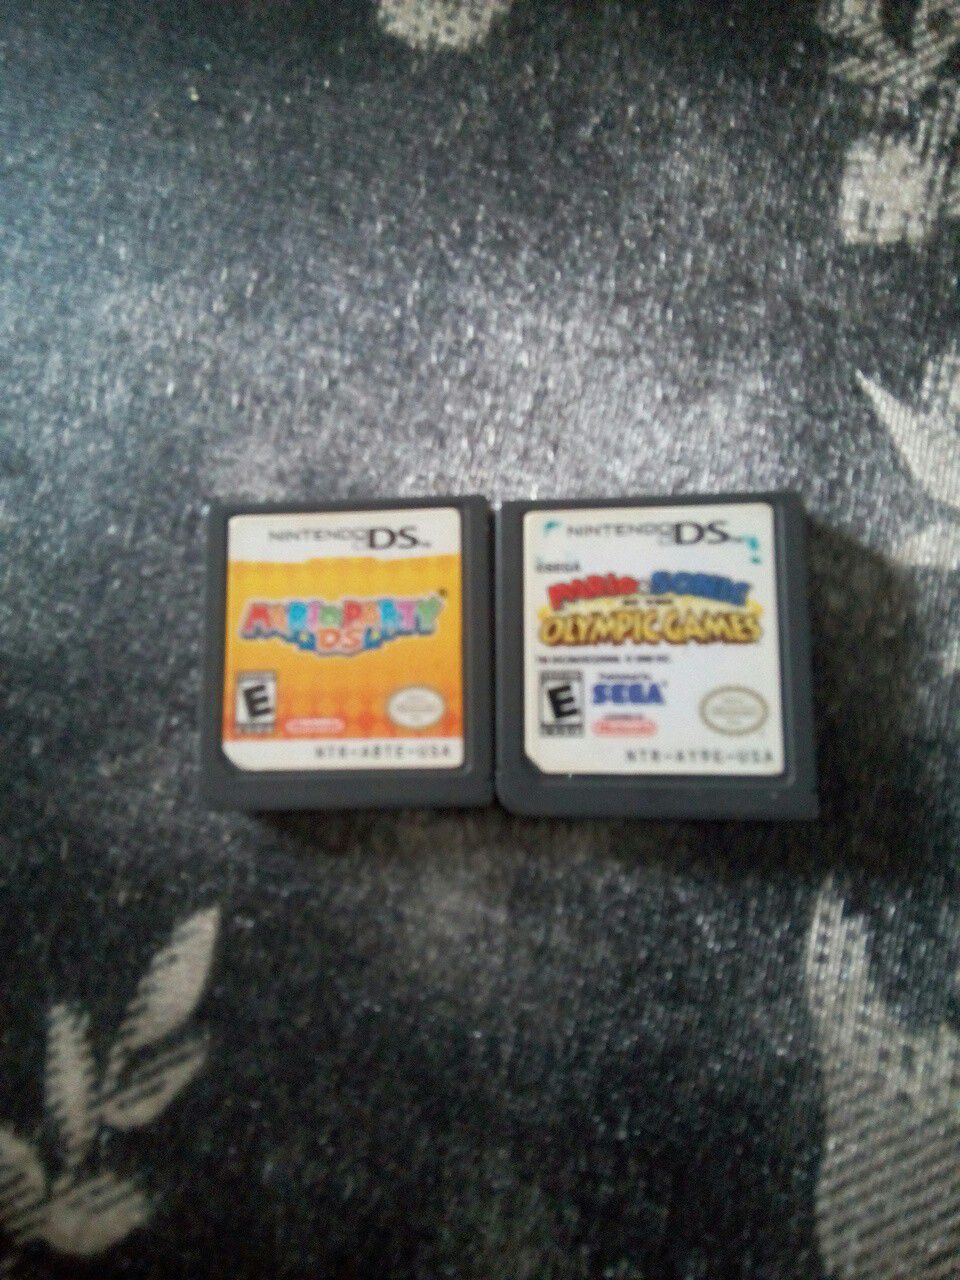 Mario party ds and Mario and sonic Olympic games